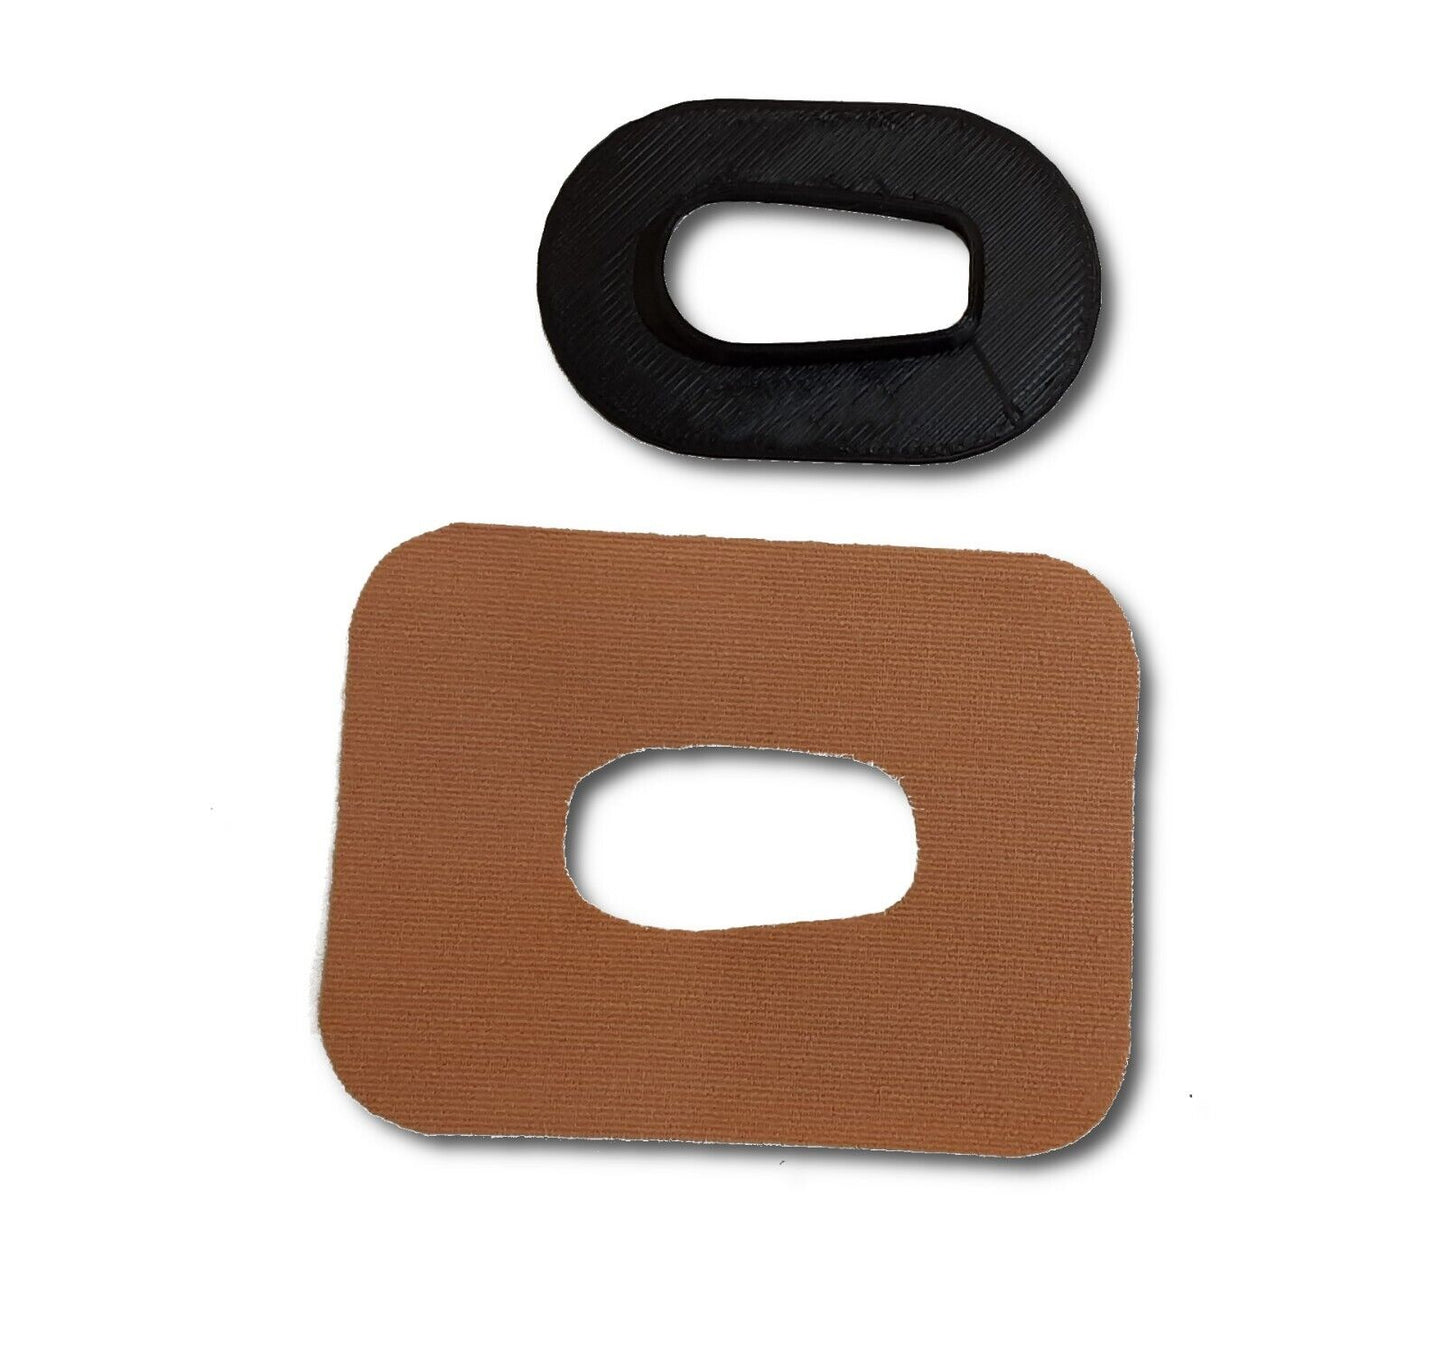 Flexible & Reusable Cover and x10 Patches Compatible with Dexcom G6 Sensor